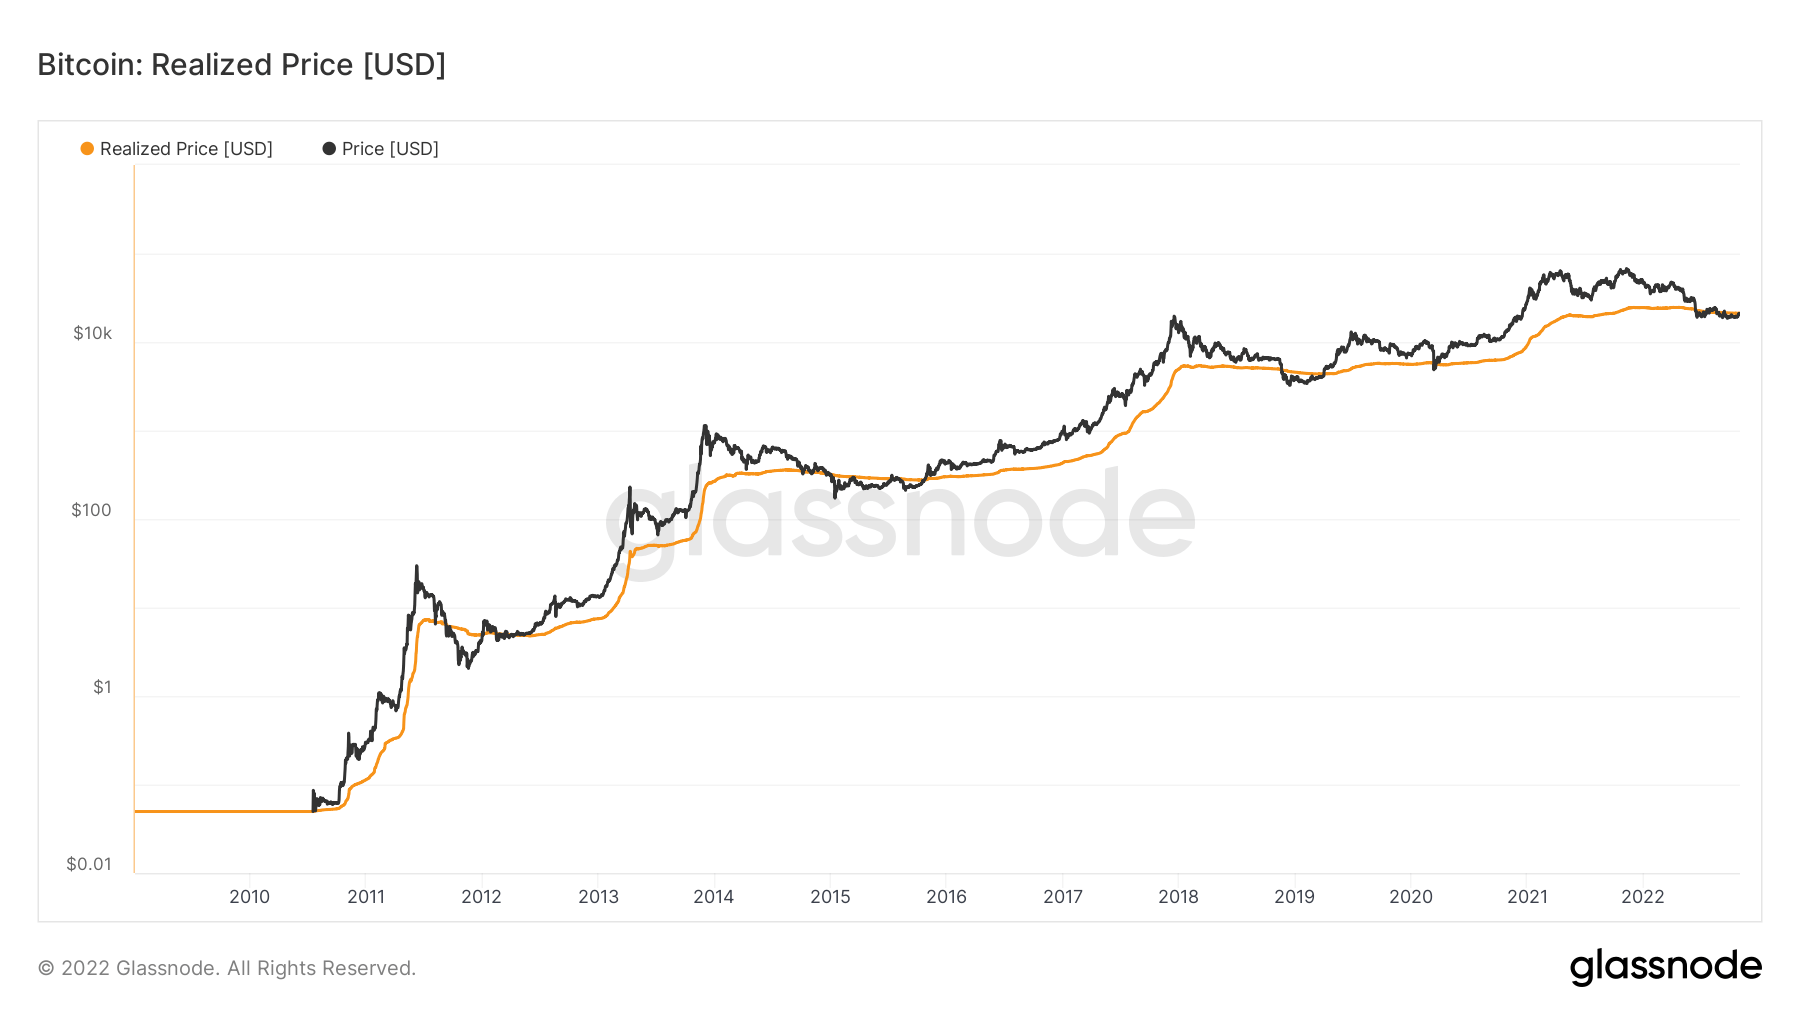 Bitcoin realized price